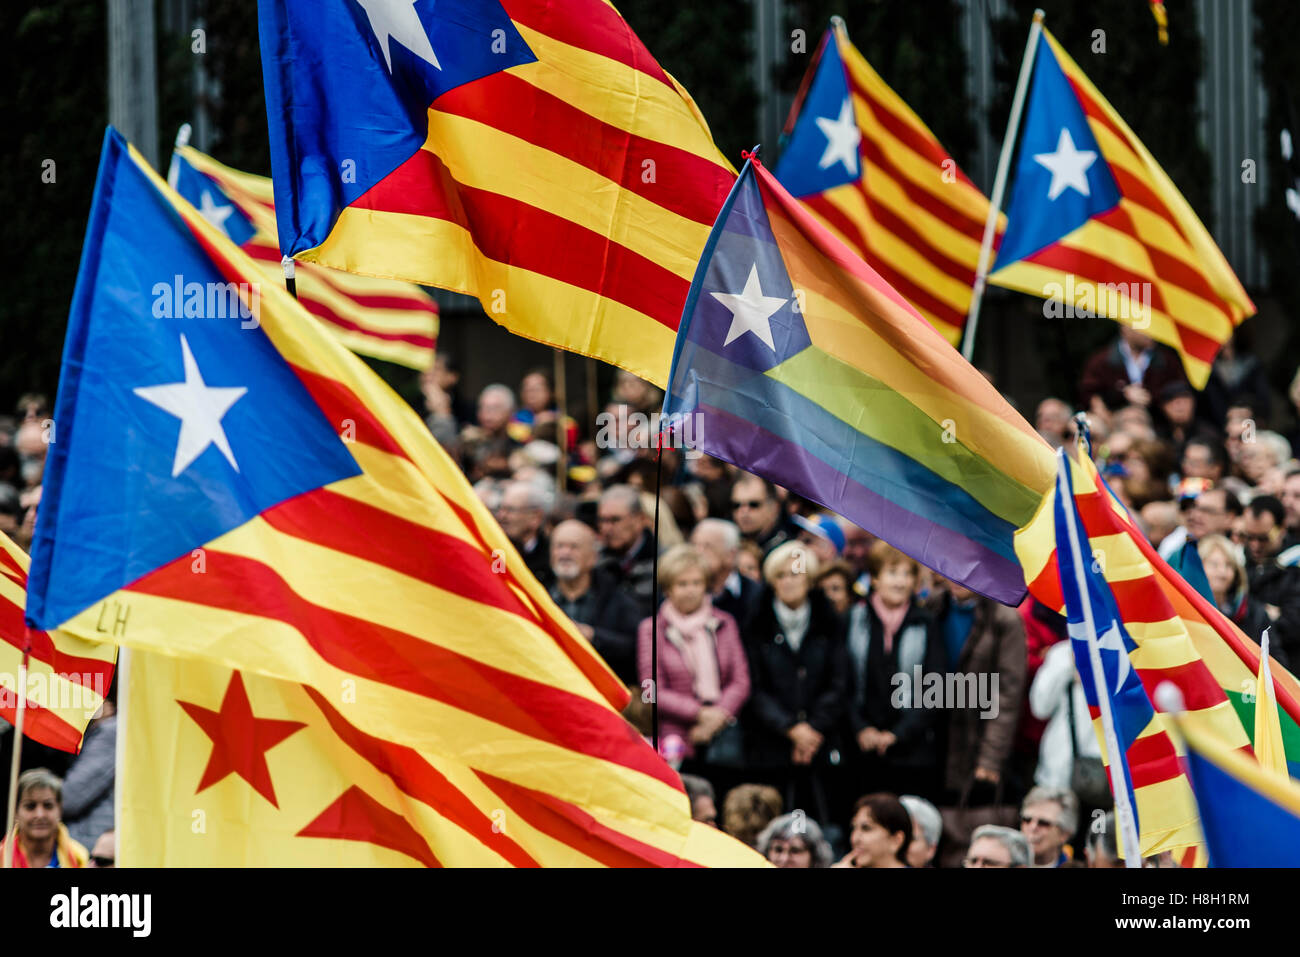 Barcelona, Spain. 13 November, 2016:  Catalan independence flags wave as tens of thousands of pro-independence Catalans gather at Barcelona's Montjuic Fountains to protest legal persecution of Catalan pro-secession politicians and Catalonia Credit:  matthi/Alamy Live News Stock Photo